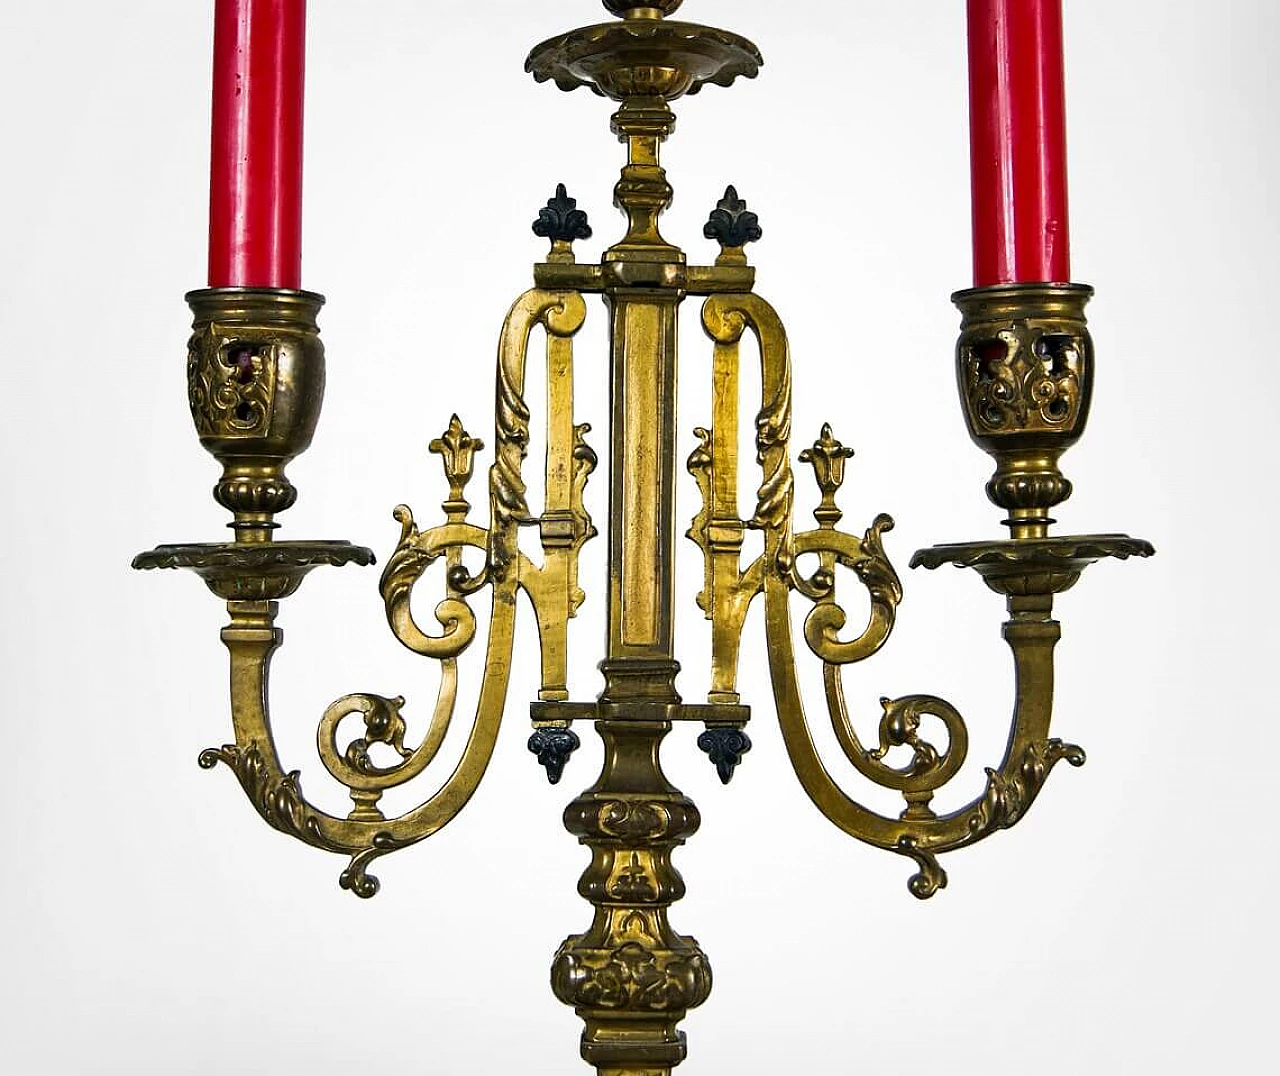 Fireplace clock and pair of candelabra in brass and Champlevé enamel by Japy Frere France, 19th century 1278416